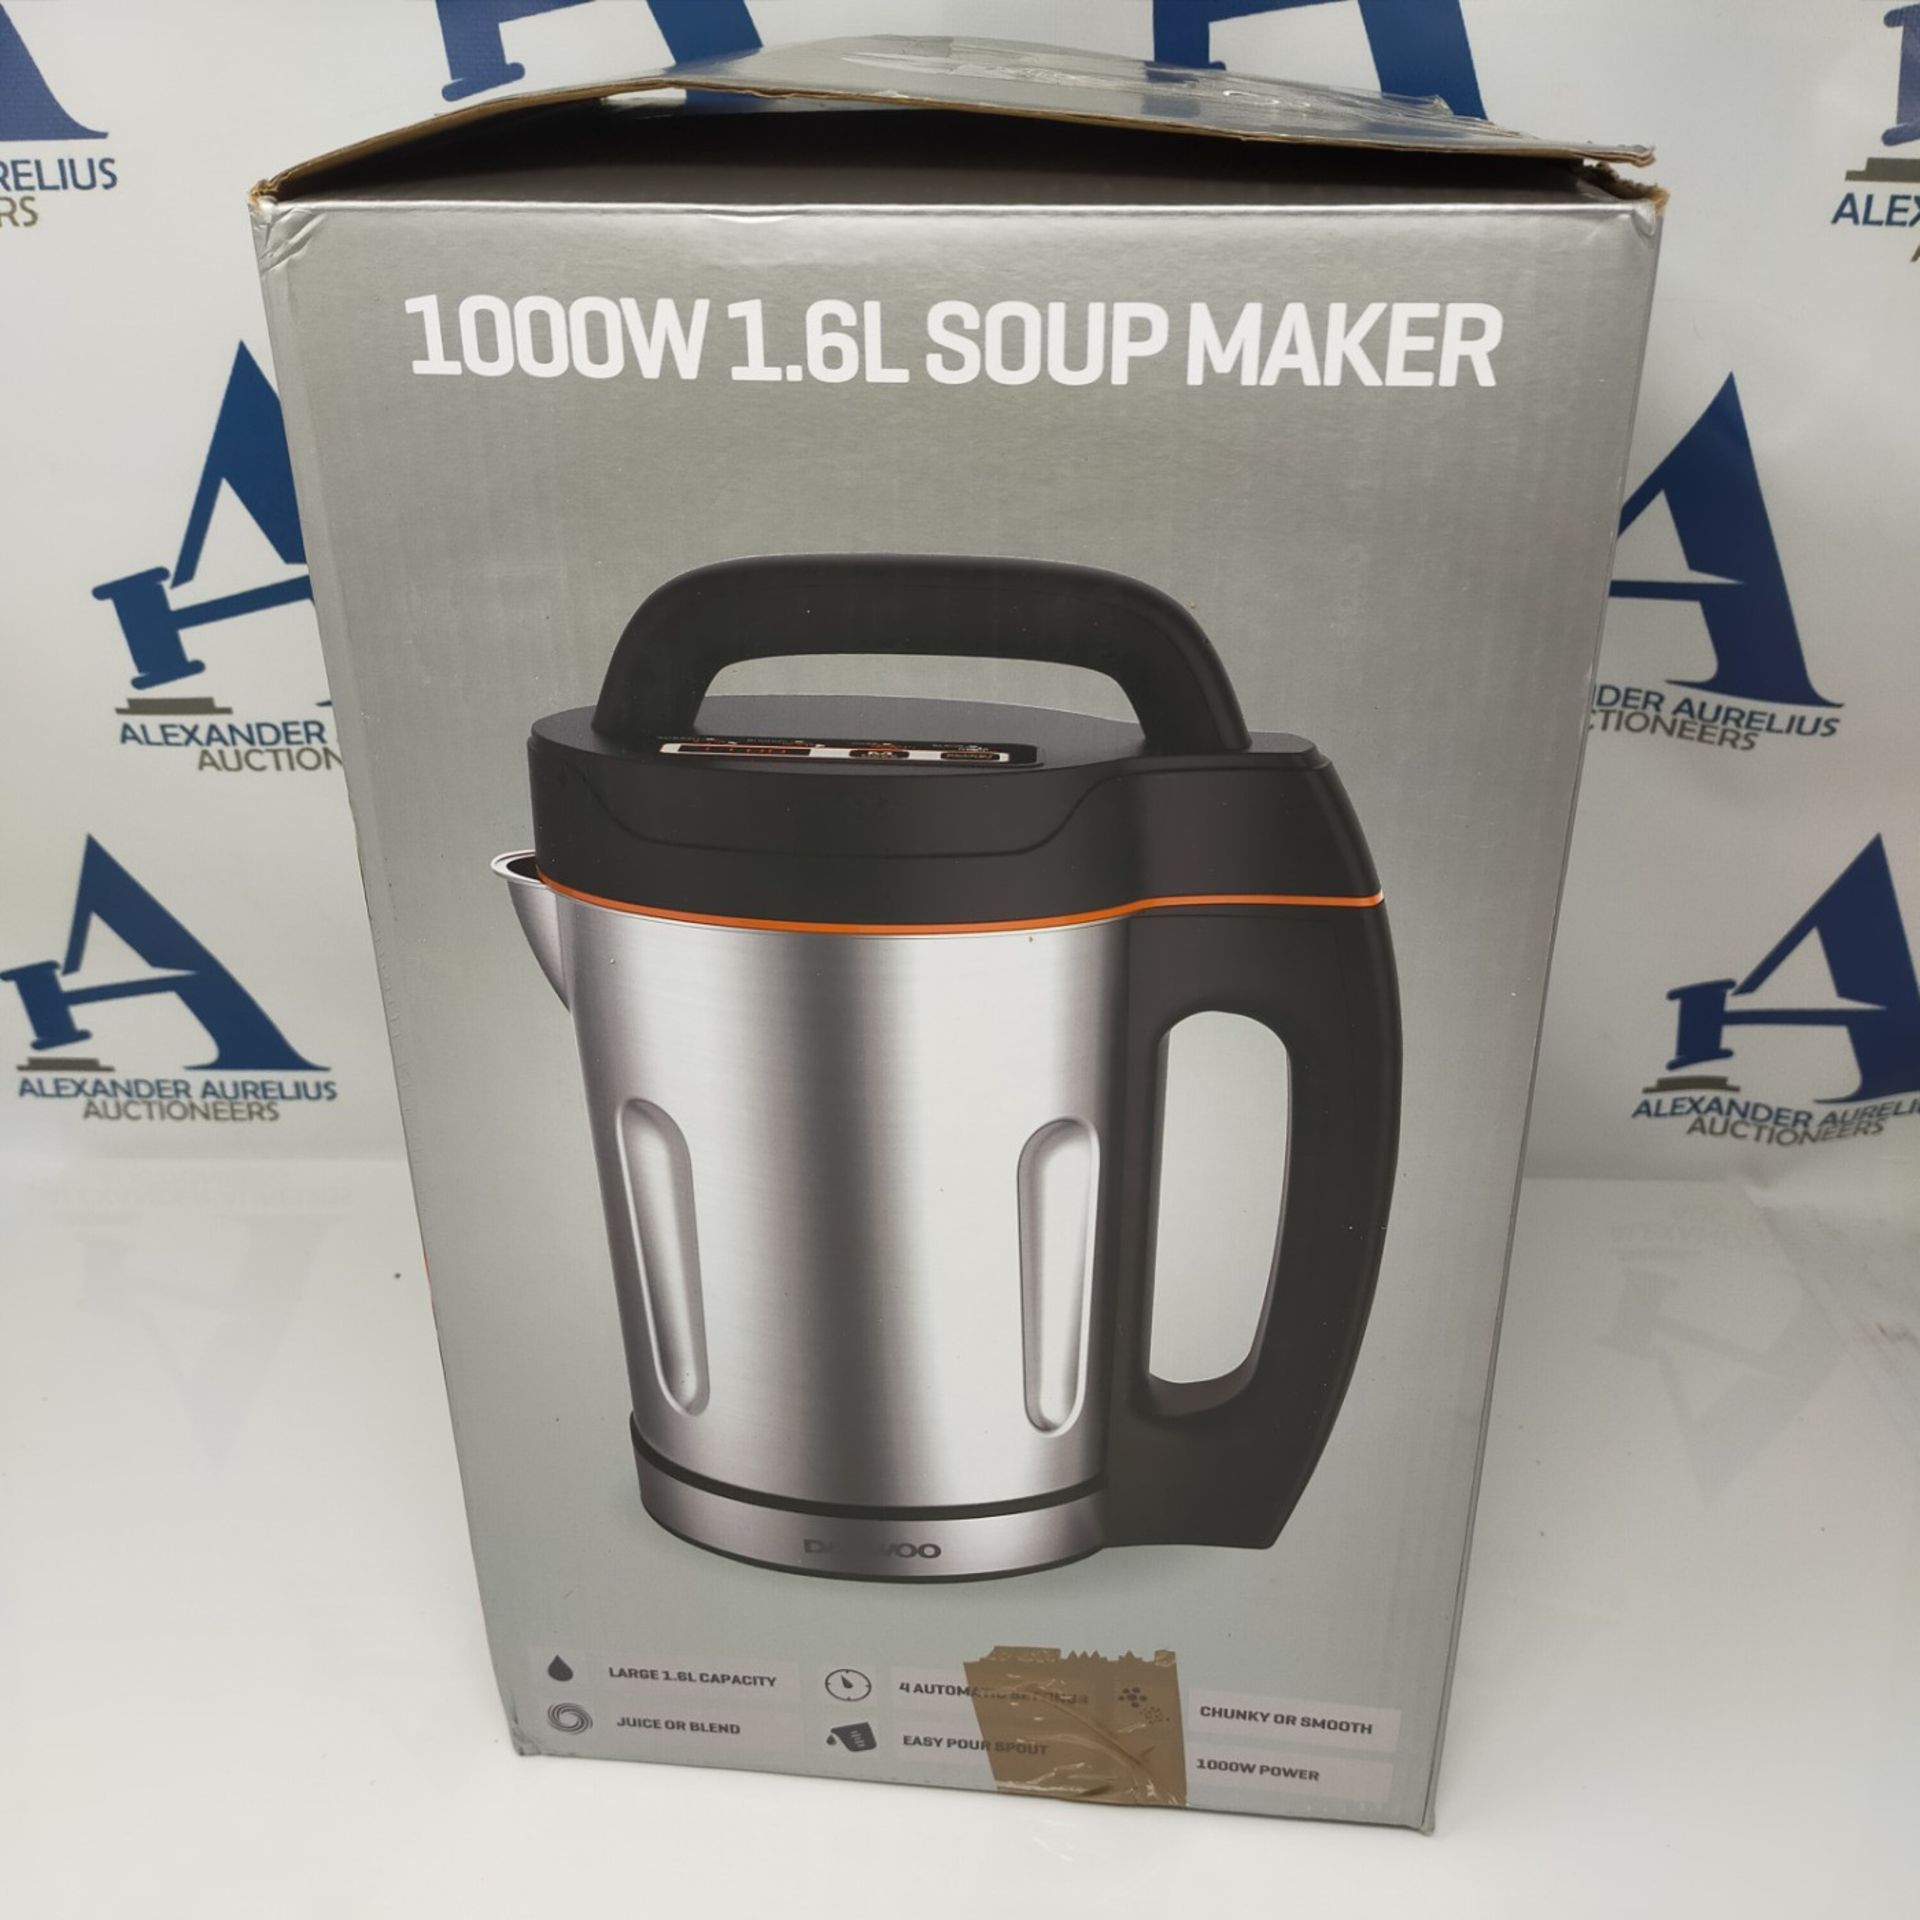 Daewoo SDA1714 Soup Maker | Usage-1000W | 1.6L Capacity | Ideal for Smooth & Chunky So - Bild 2 aus 3